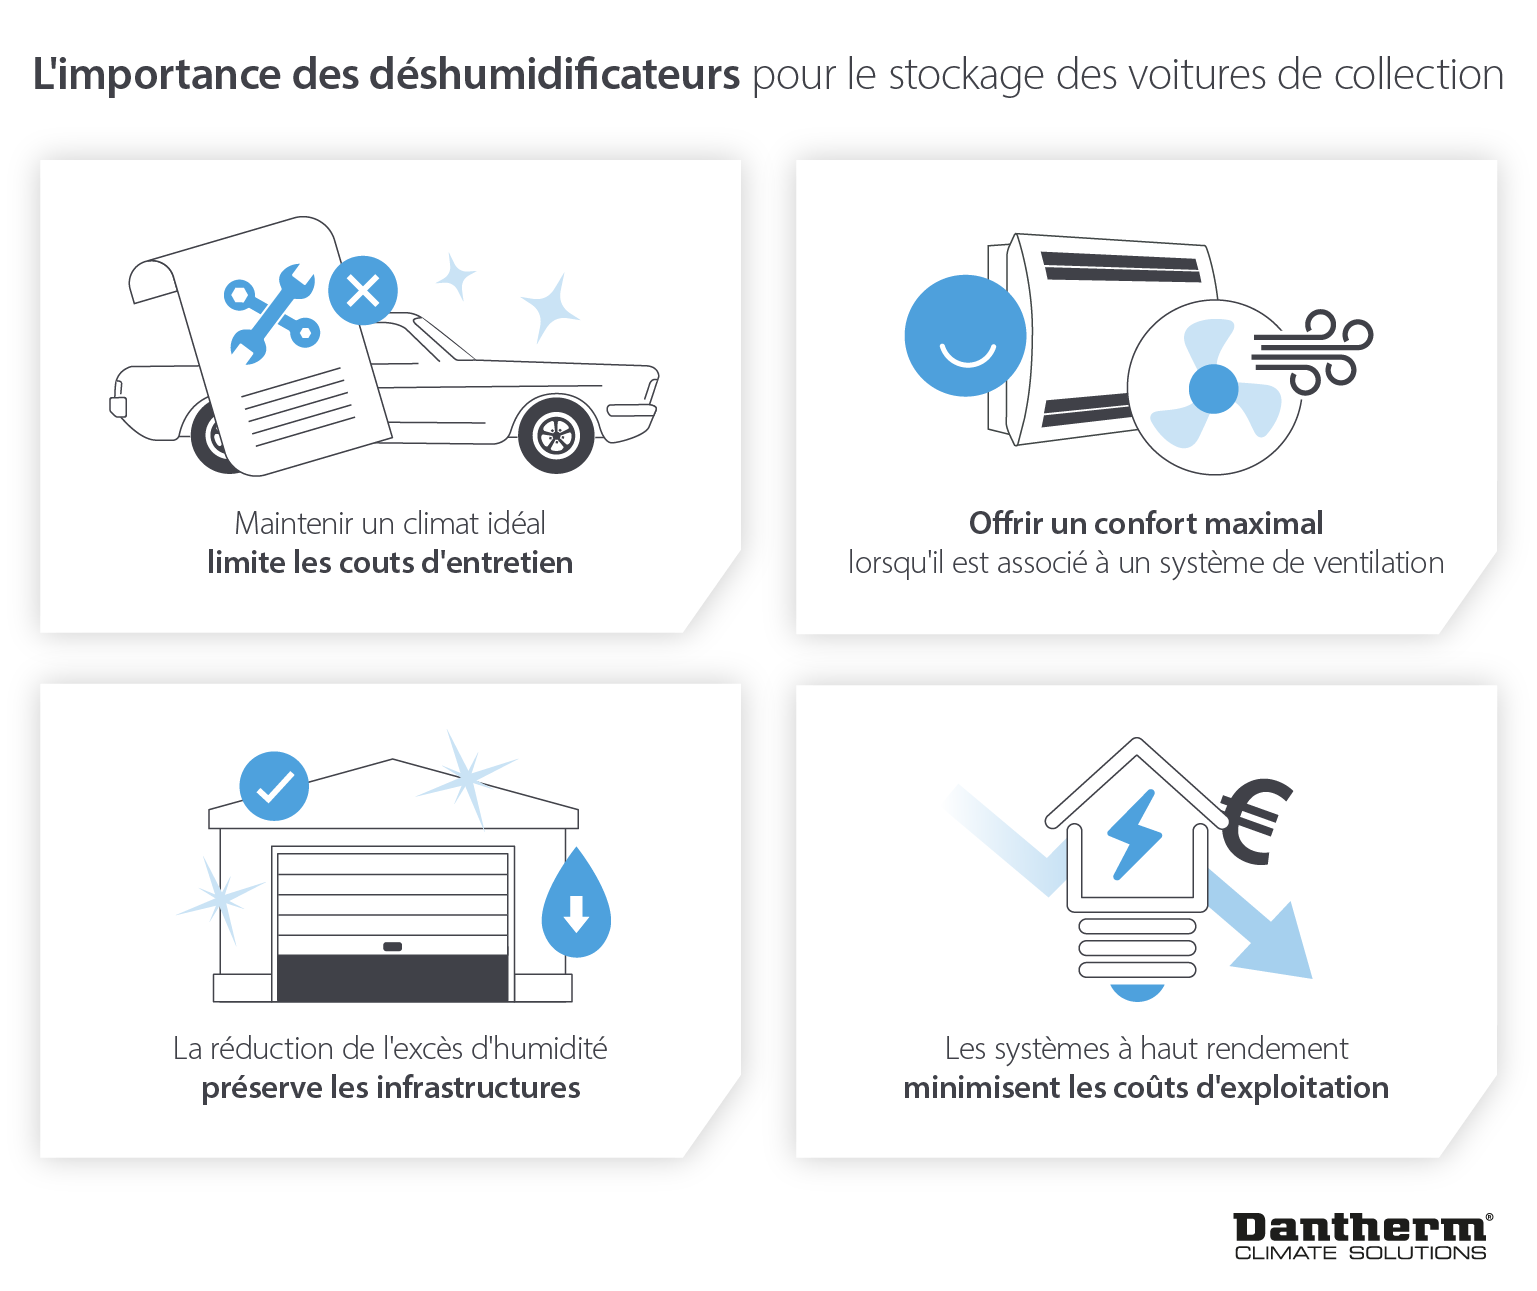 How dehumidifiers help maintain ideal climate for car storage to preserve and reduce repair bills - infographic image